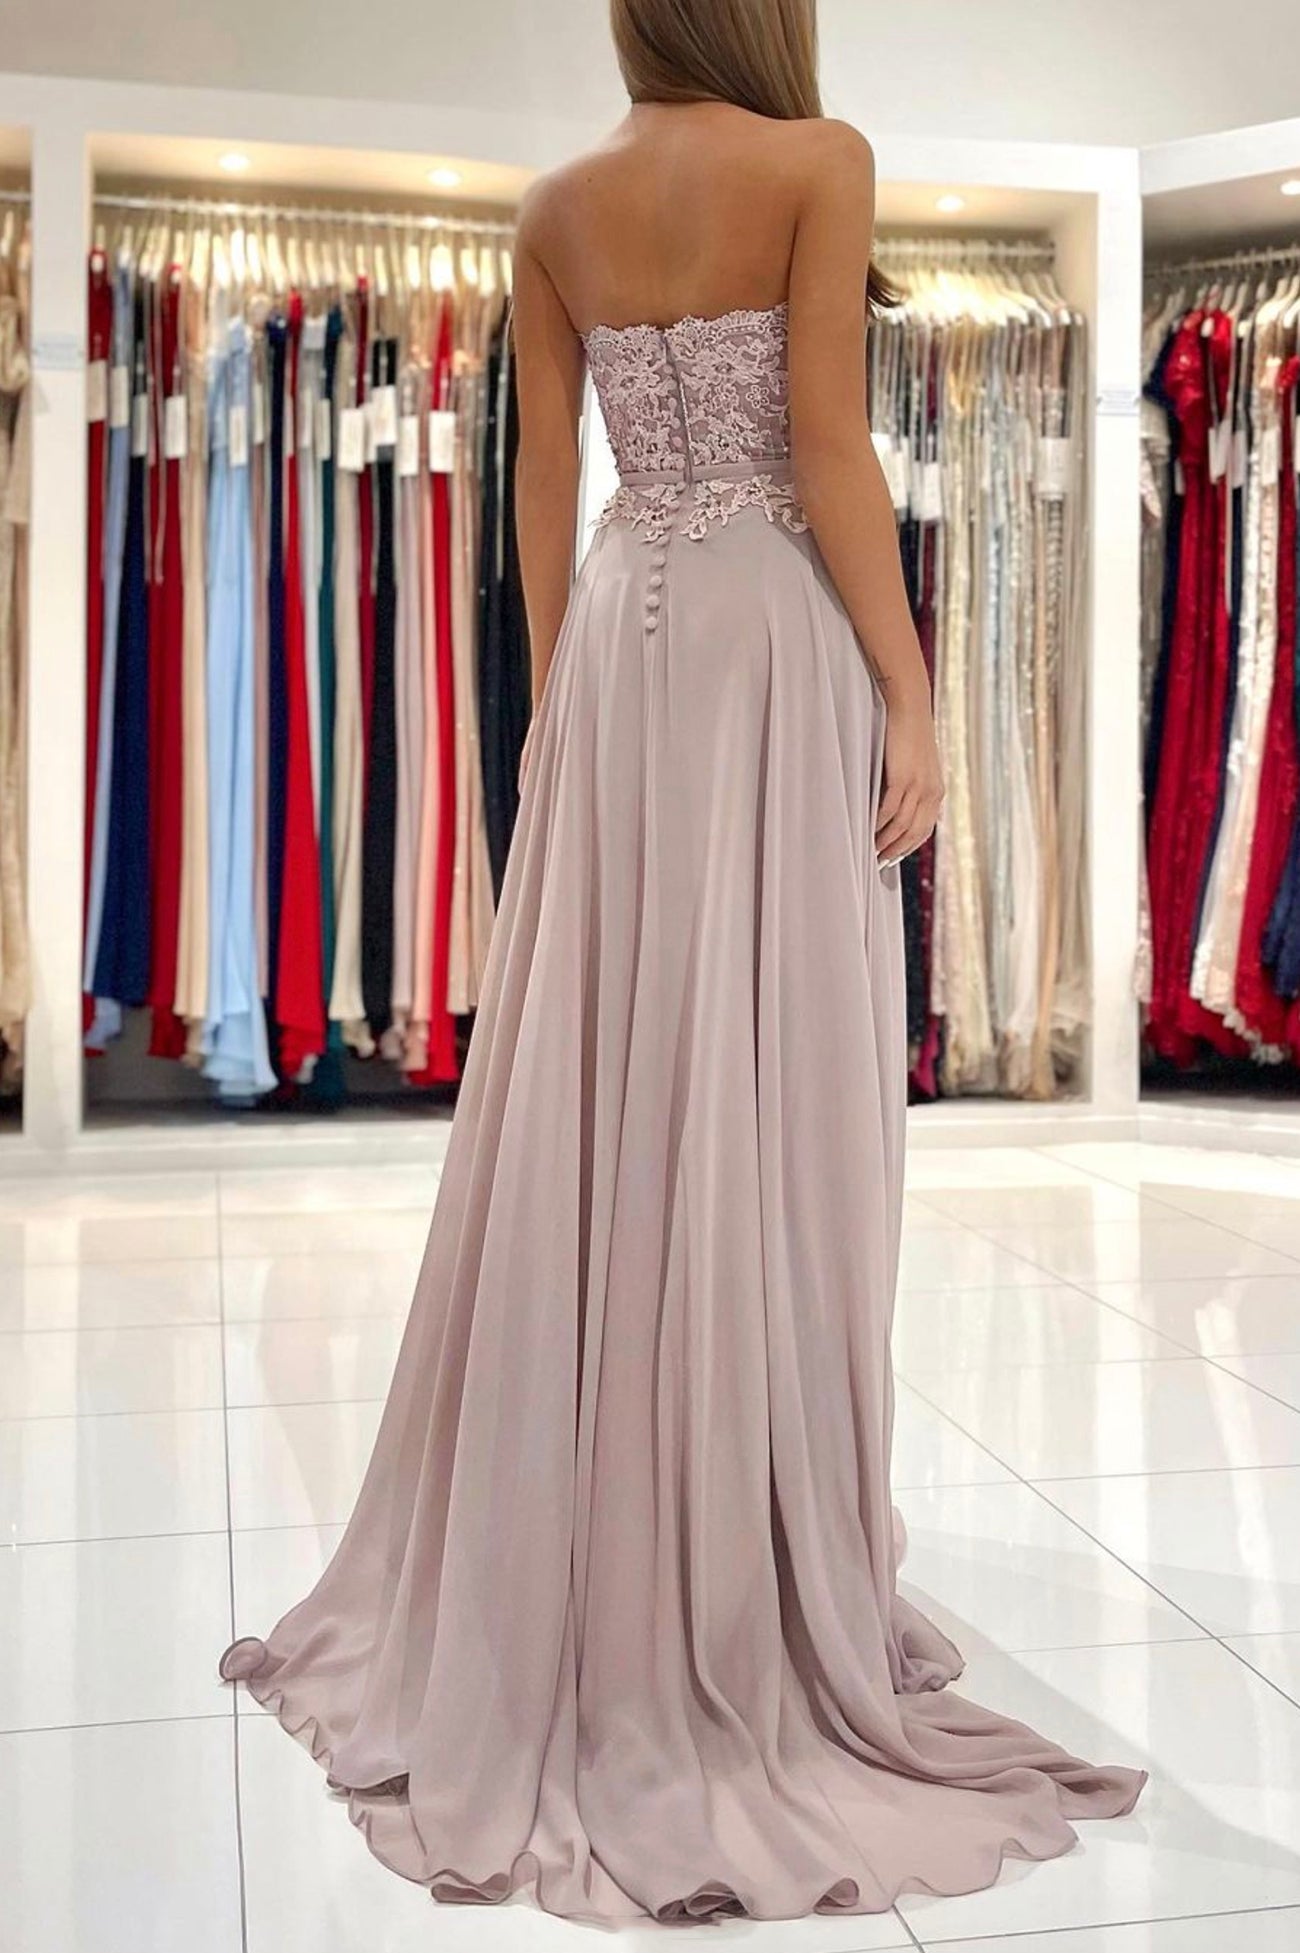 Cute Chiffon Lace Long A-Line Prom Dress, Cute Strapless Party Dress with Slit